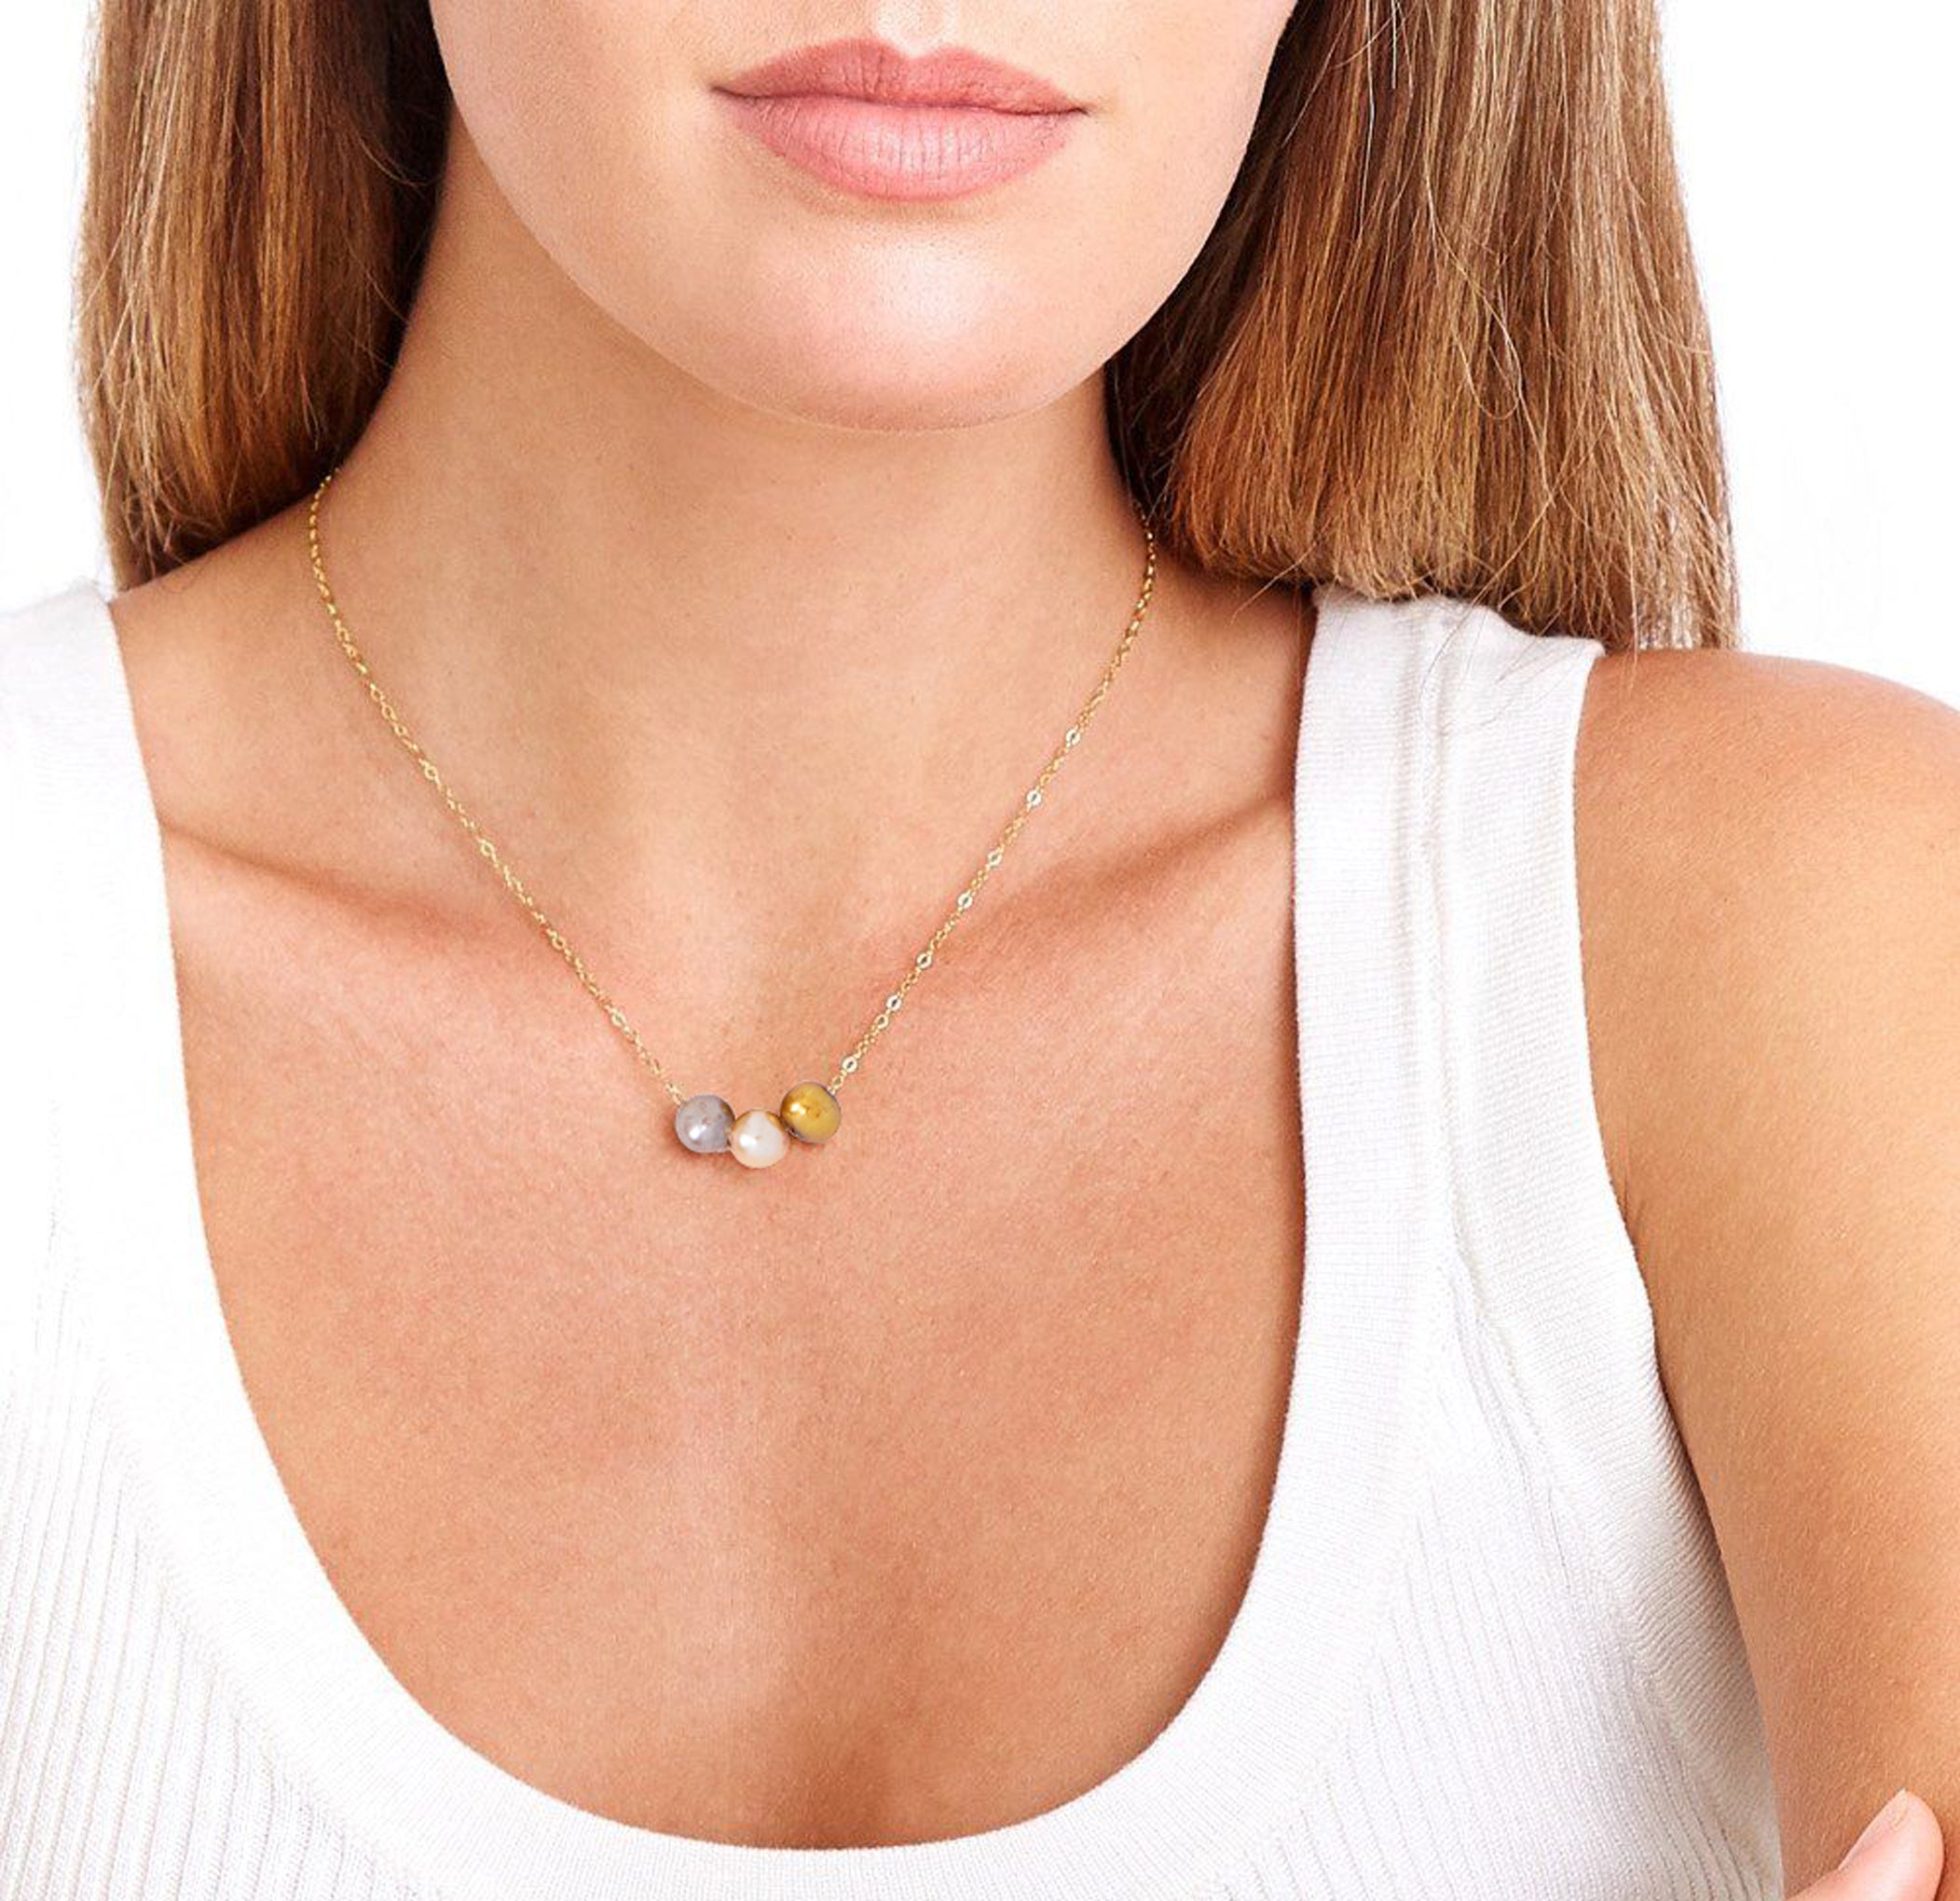 Chan Luu Pearl Trinity Pendant Necklace in Champagne Mix and Gold